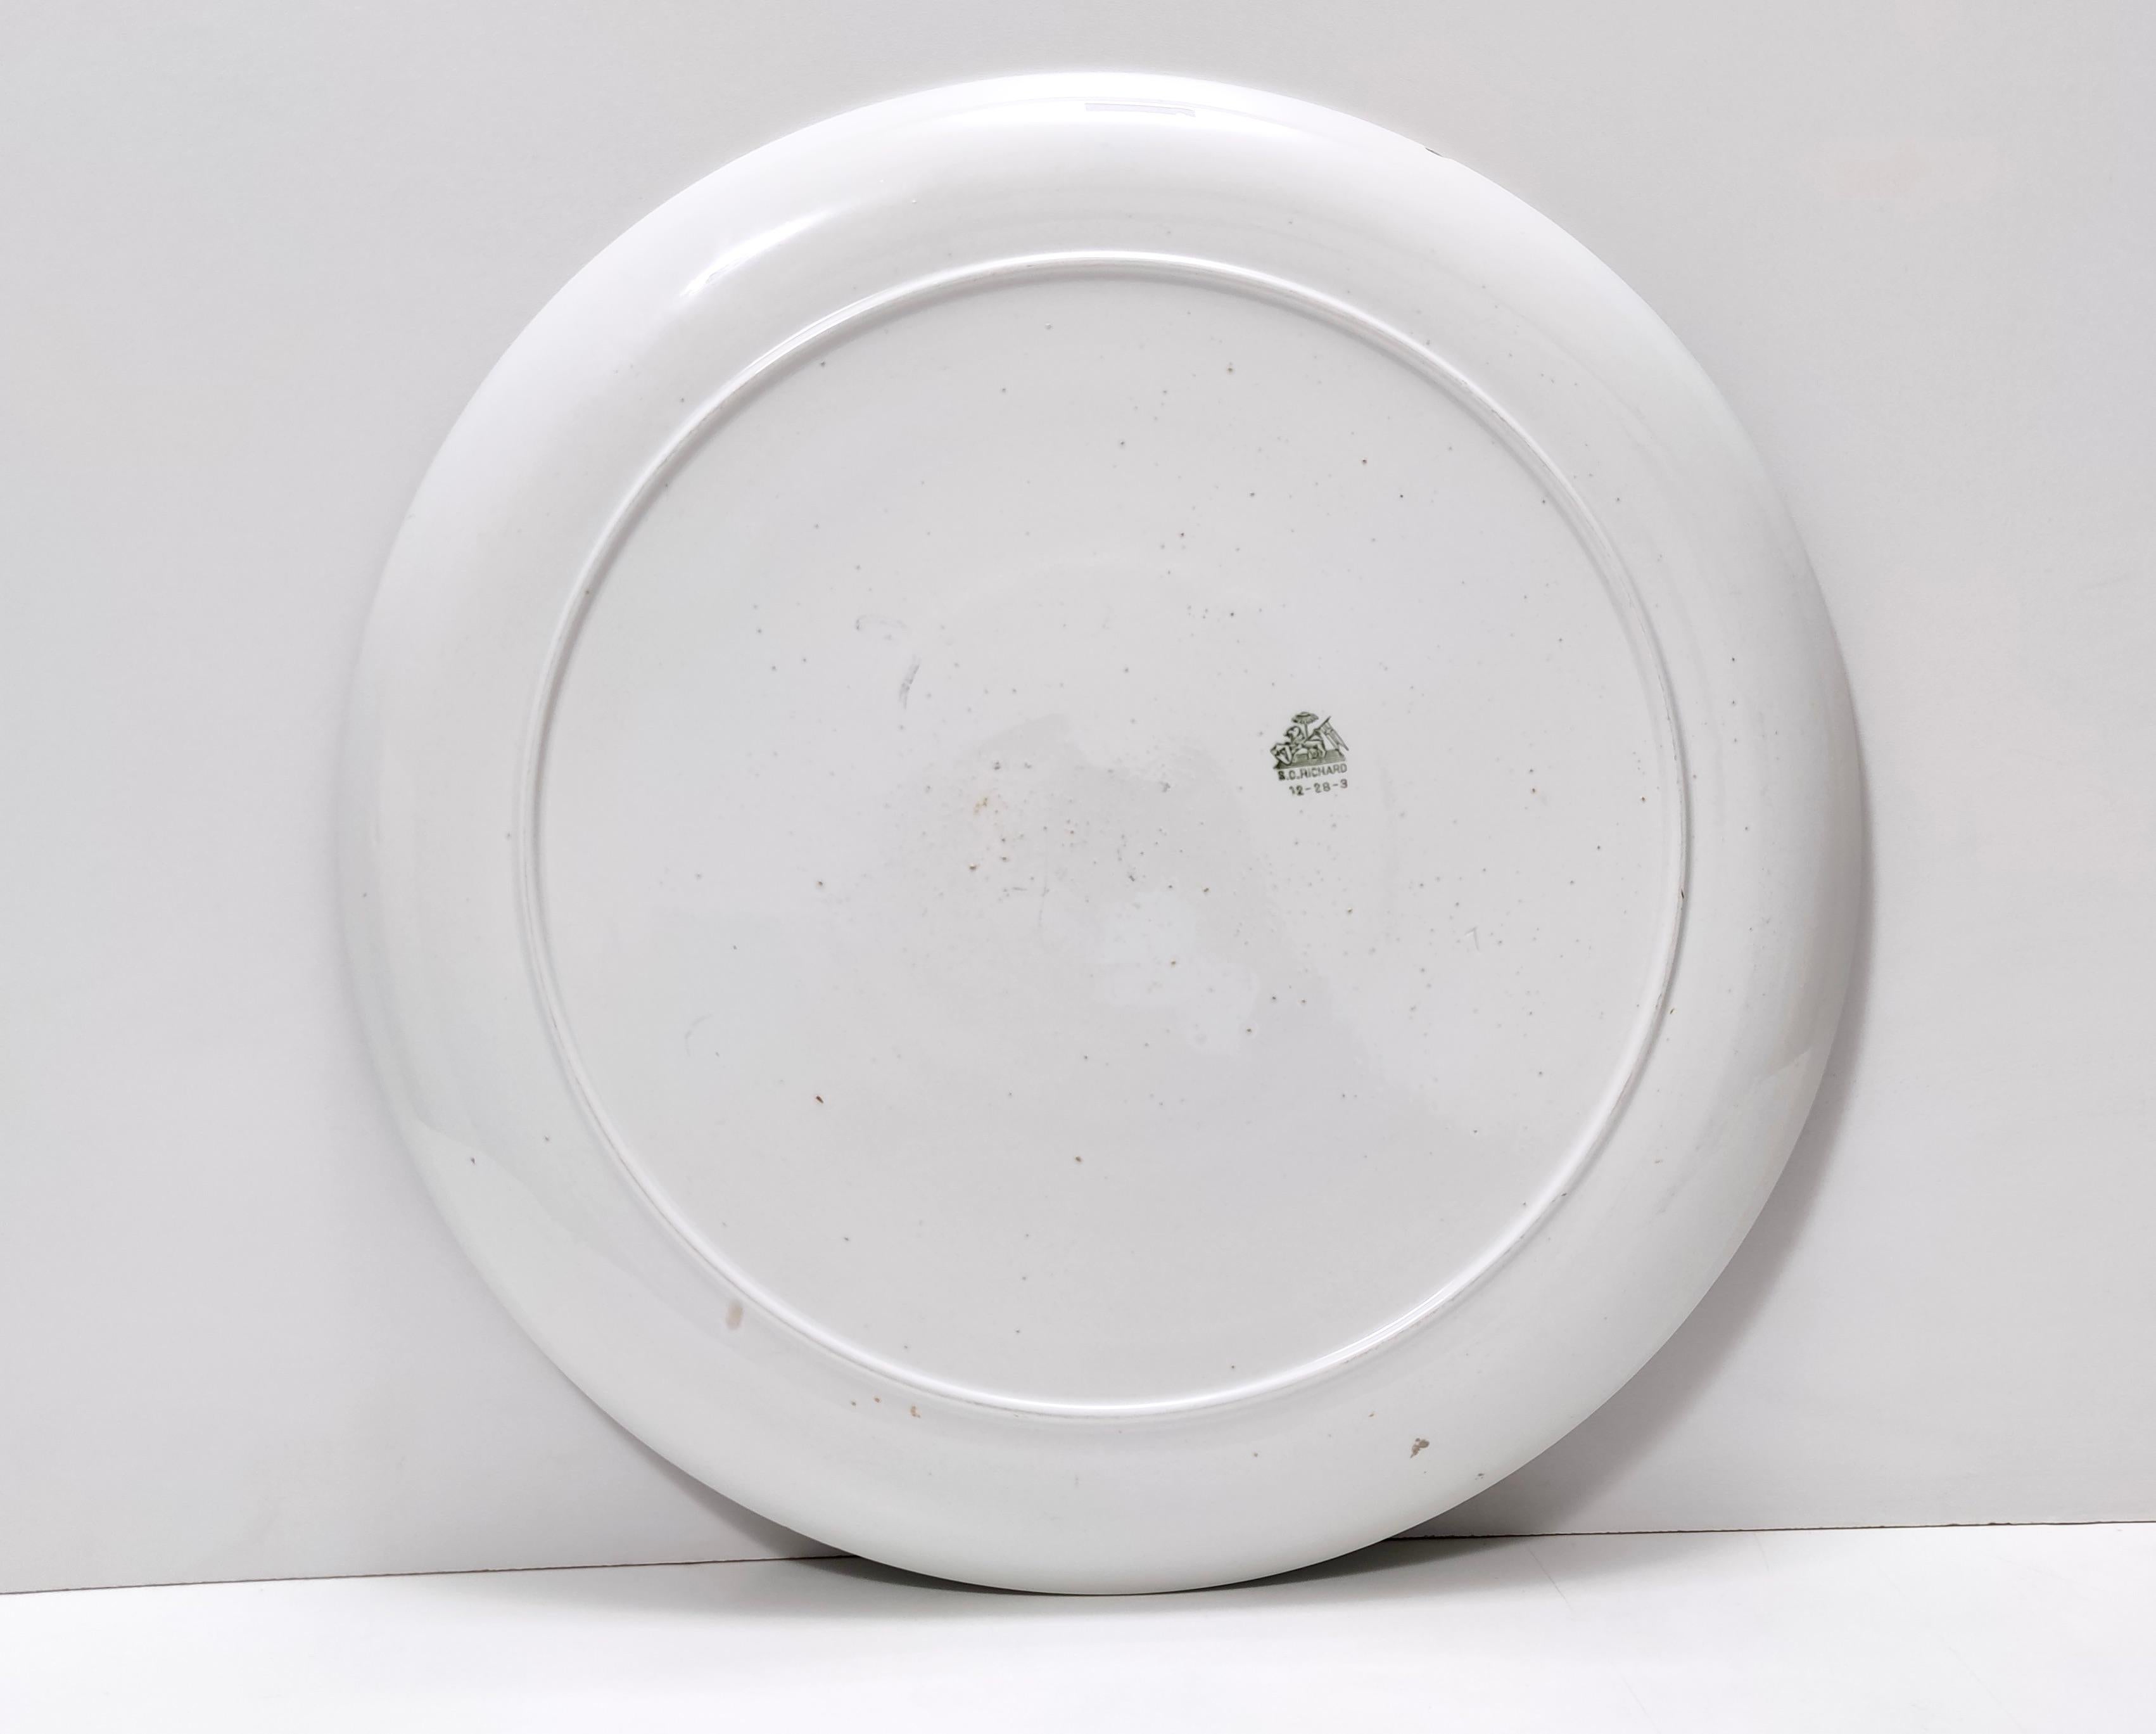 White Lacquered Ceramic Dessert Plate by Ginori Ascribable to Gio Ponti, Italy For Sale 4